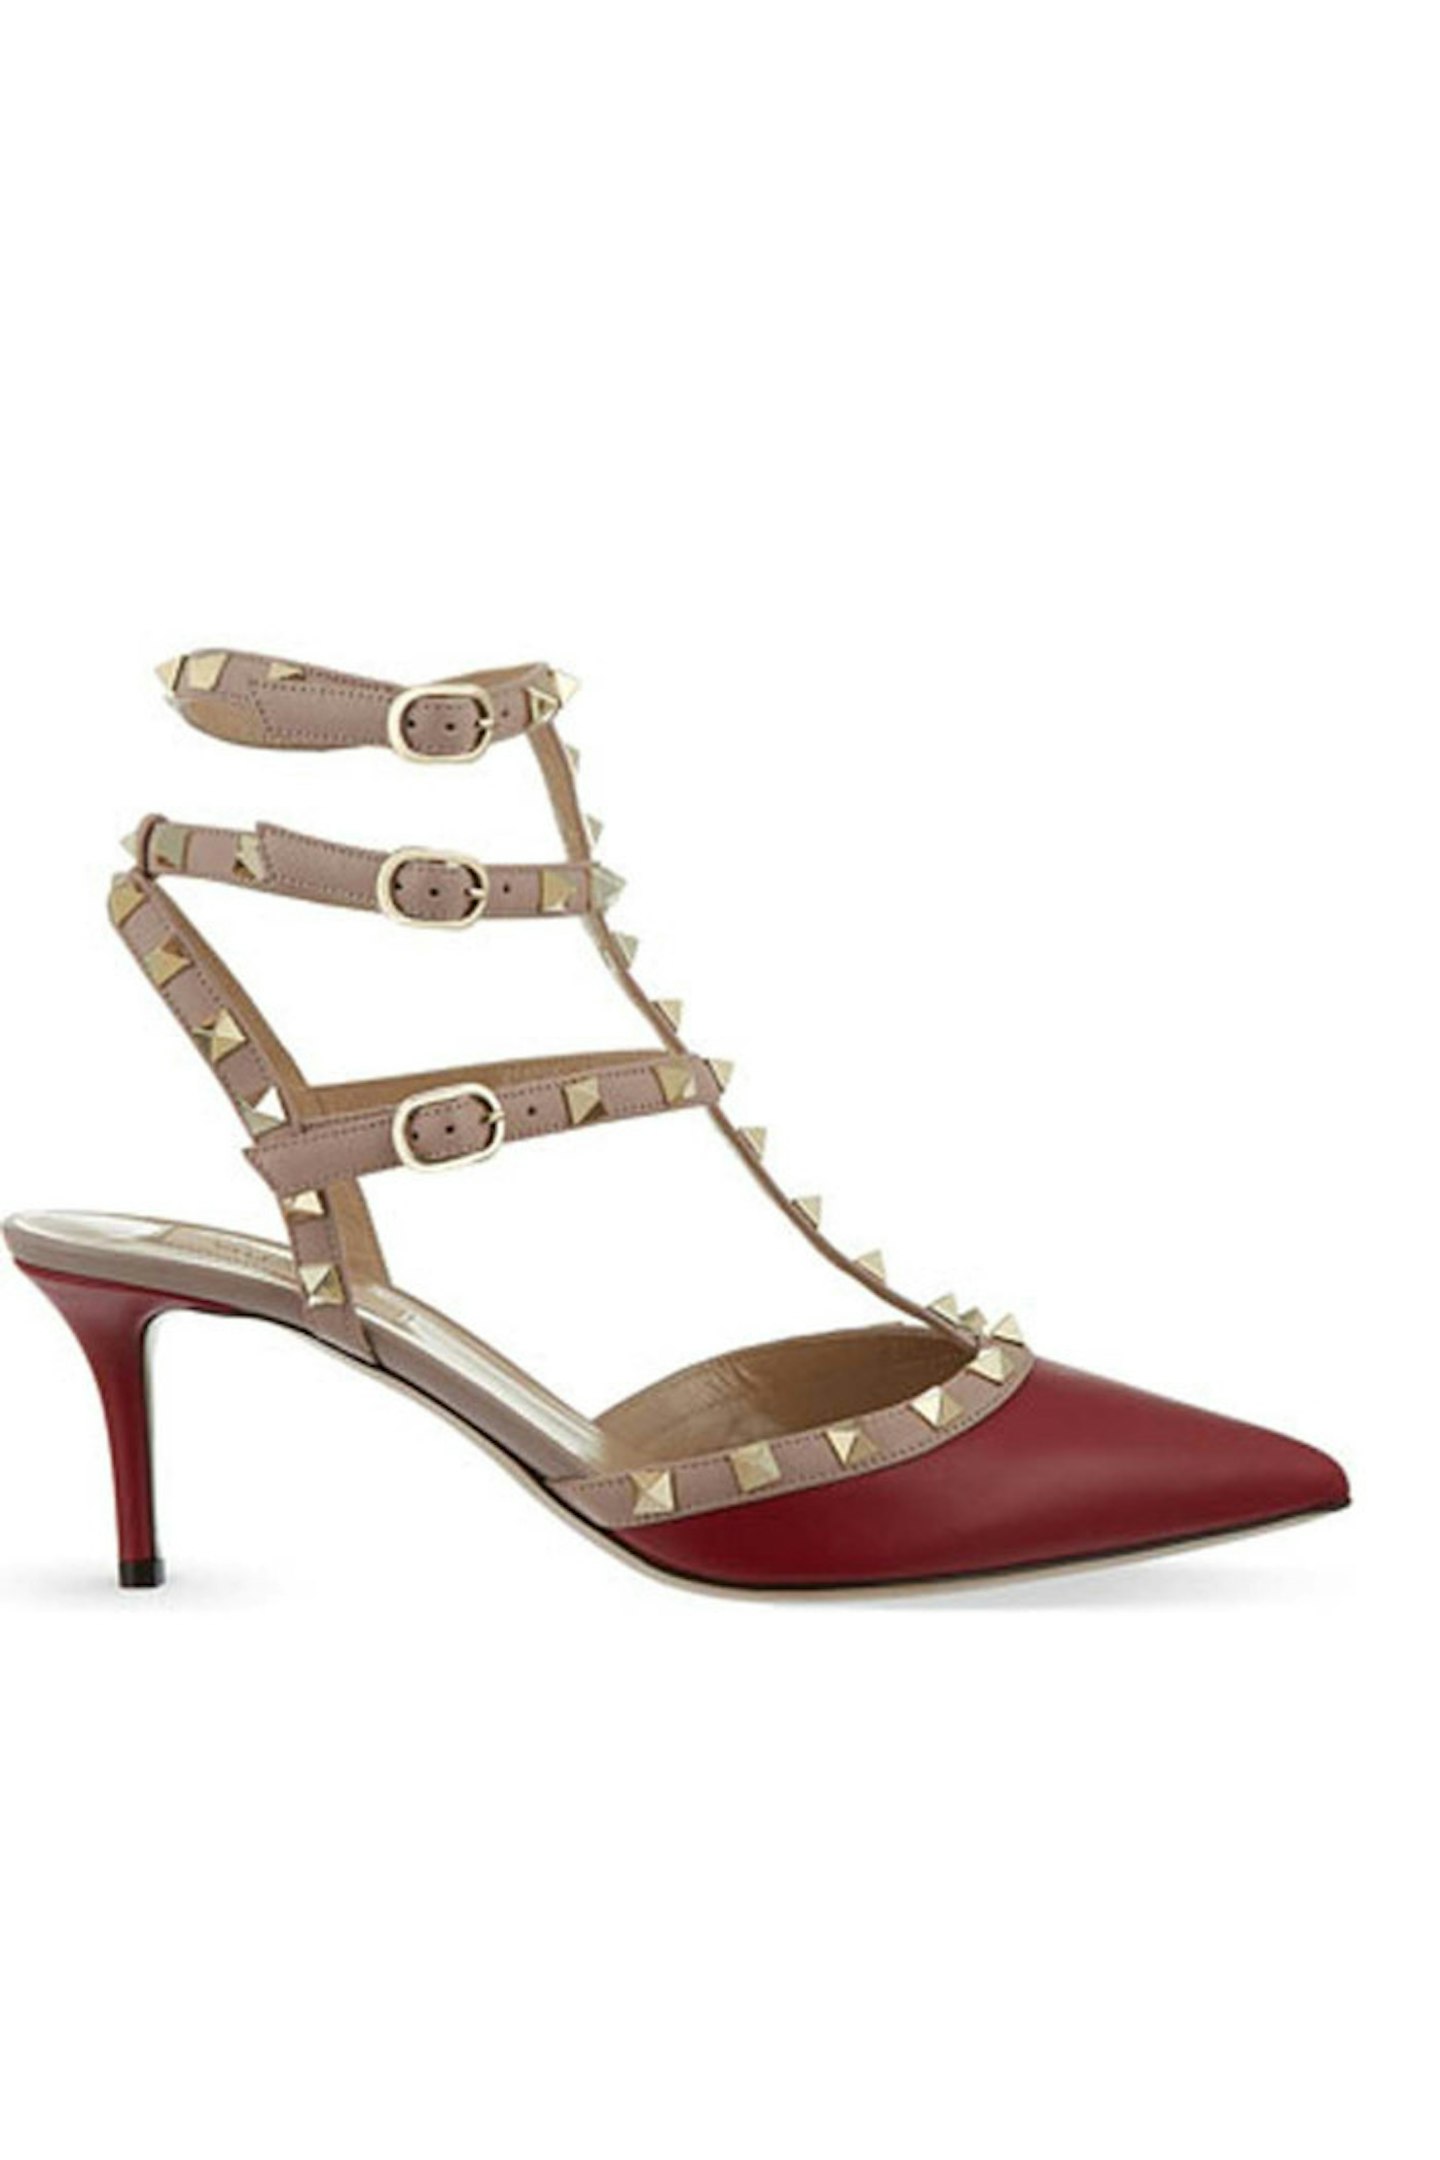 Studded Red and Beige Heels, £610, Valentino at Selfridges